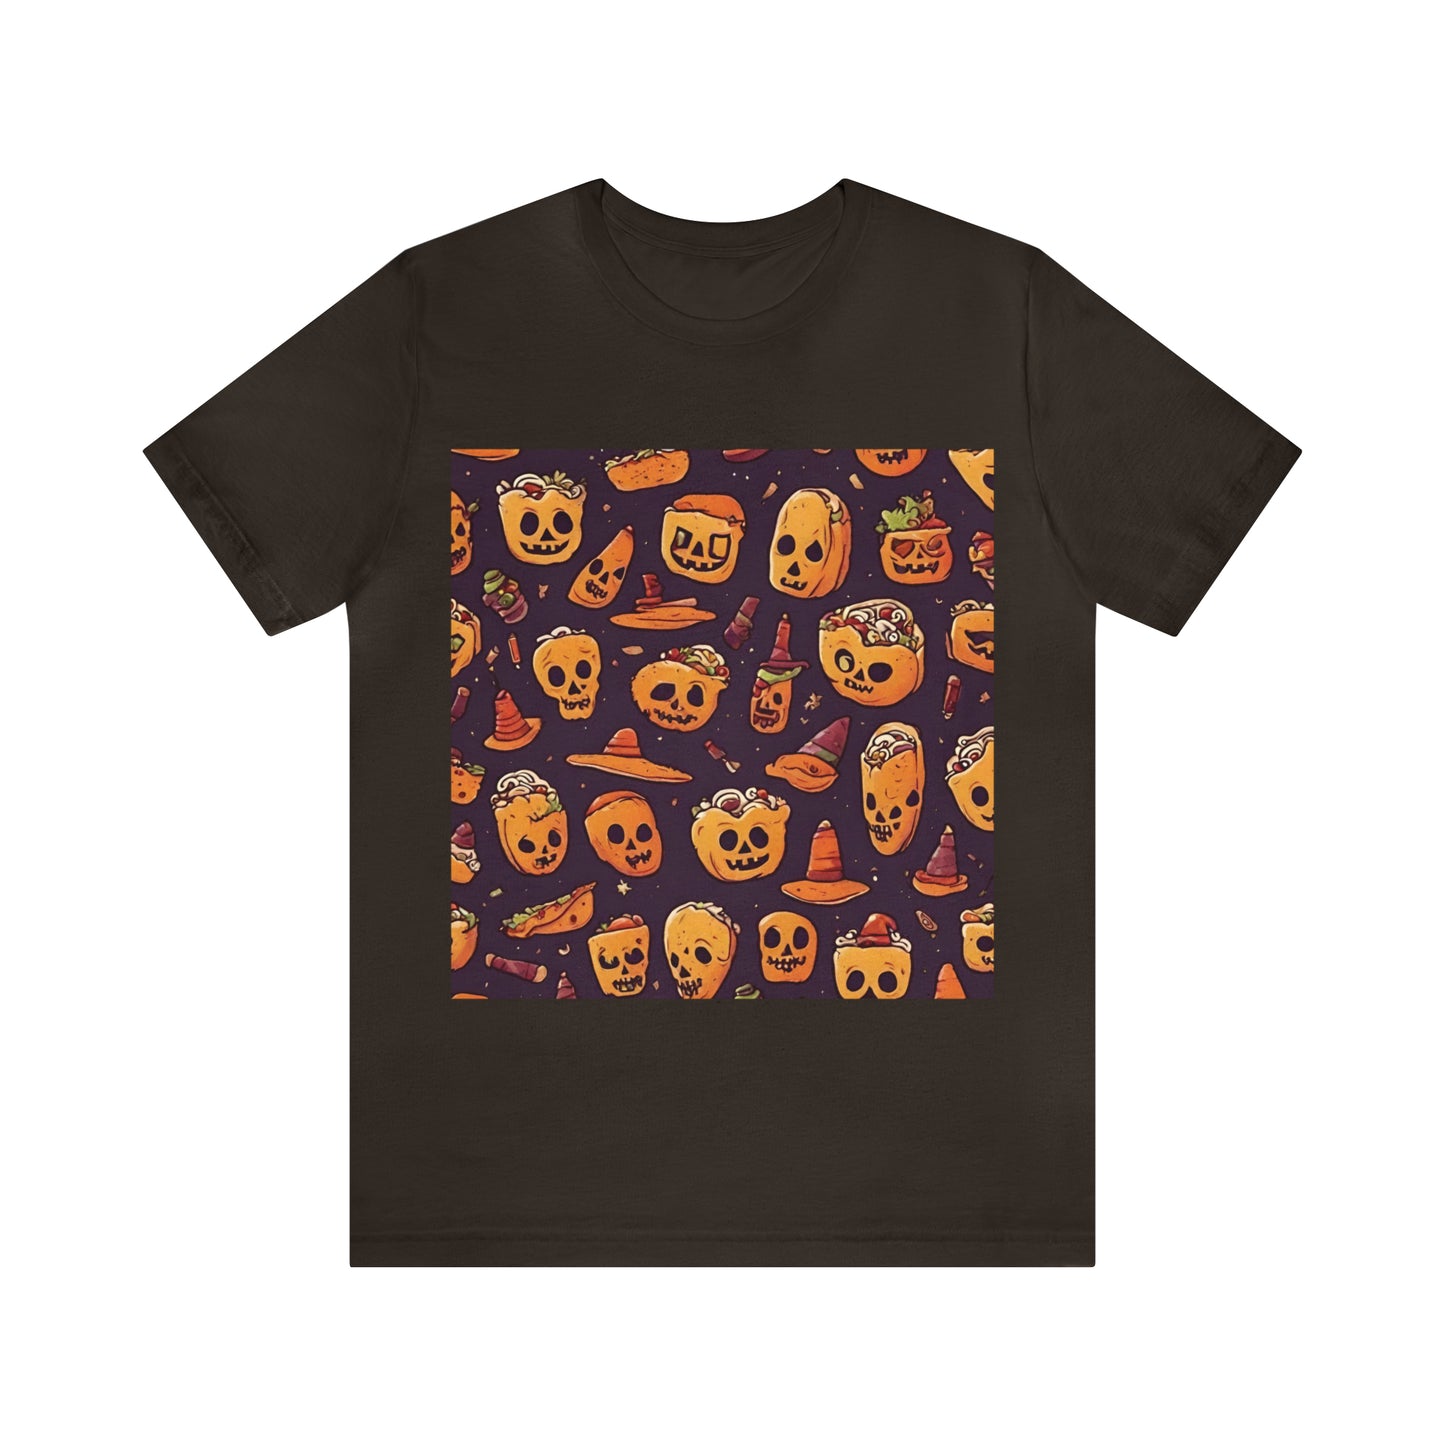 Brown T-Shirt Tshirt Design Halloween Gift for Friend and Family Short Sleeved Shirt Petrova Designs